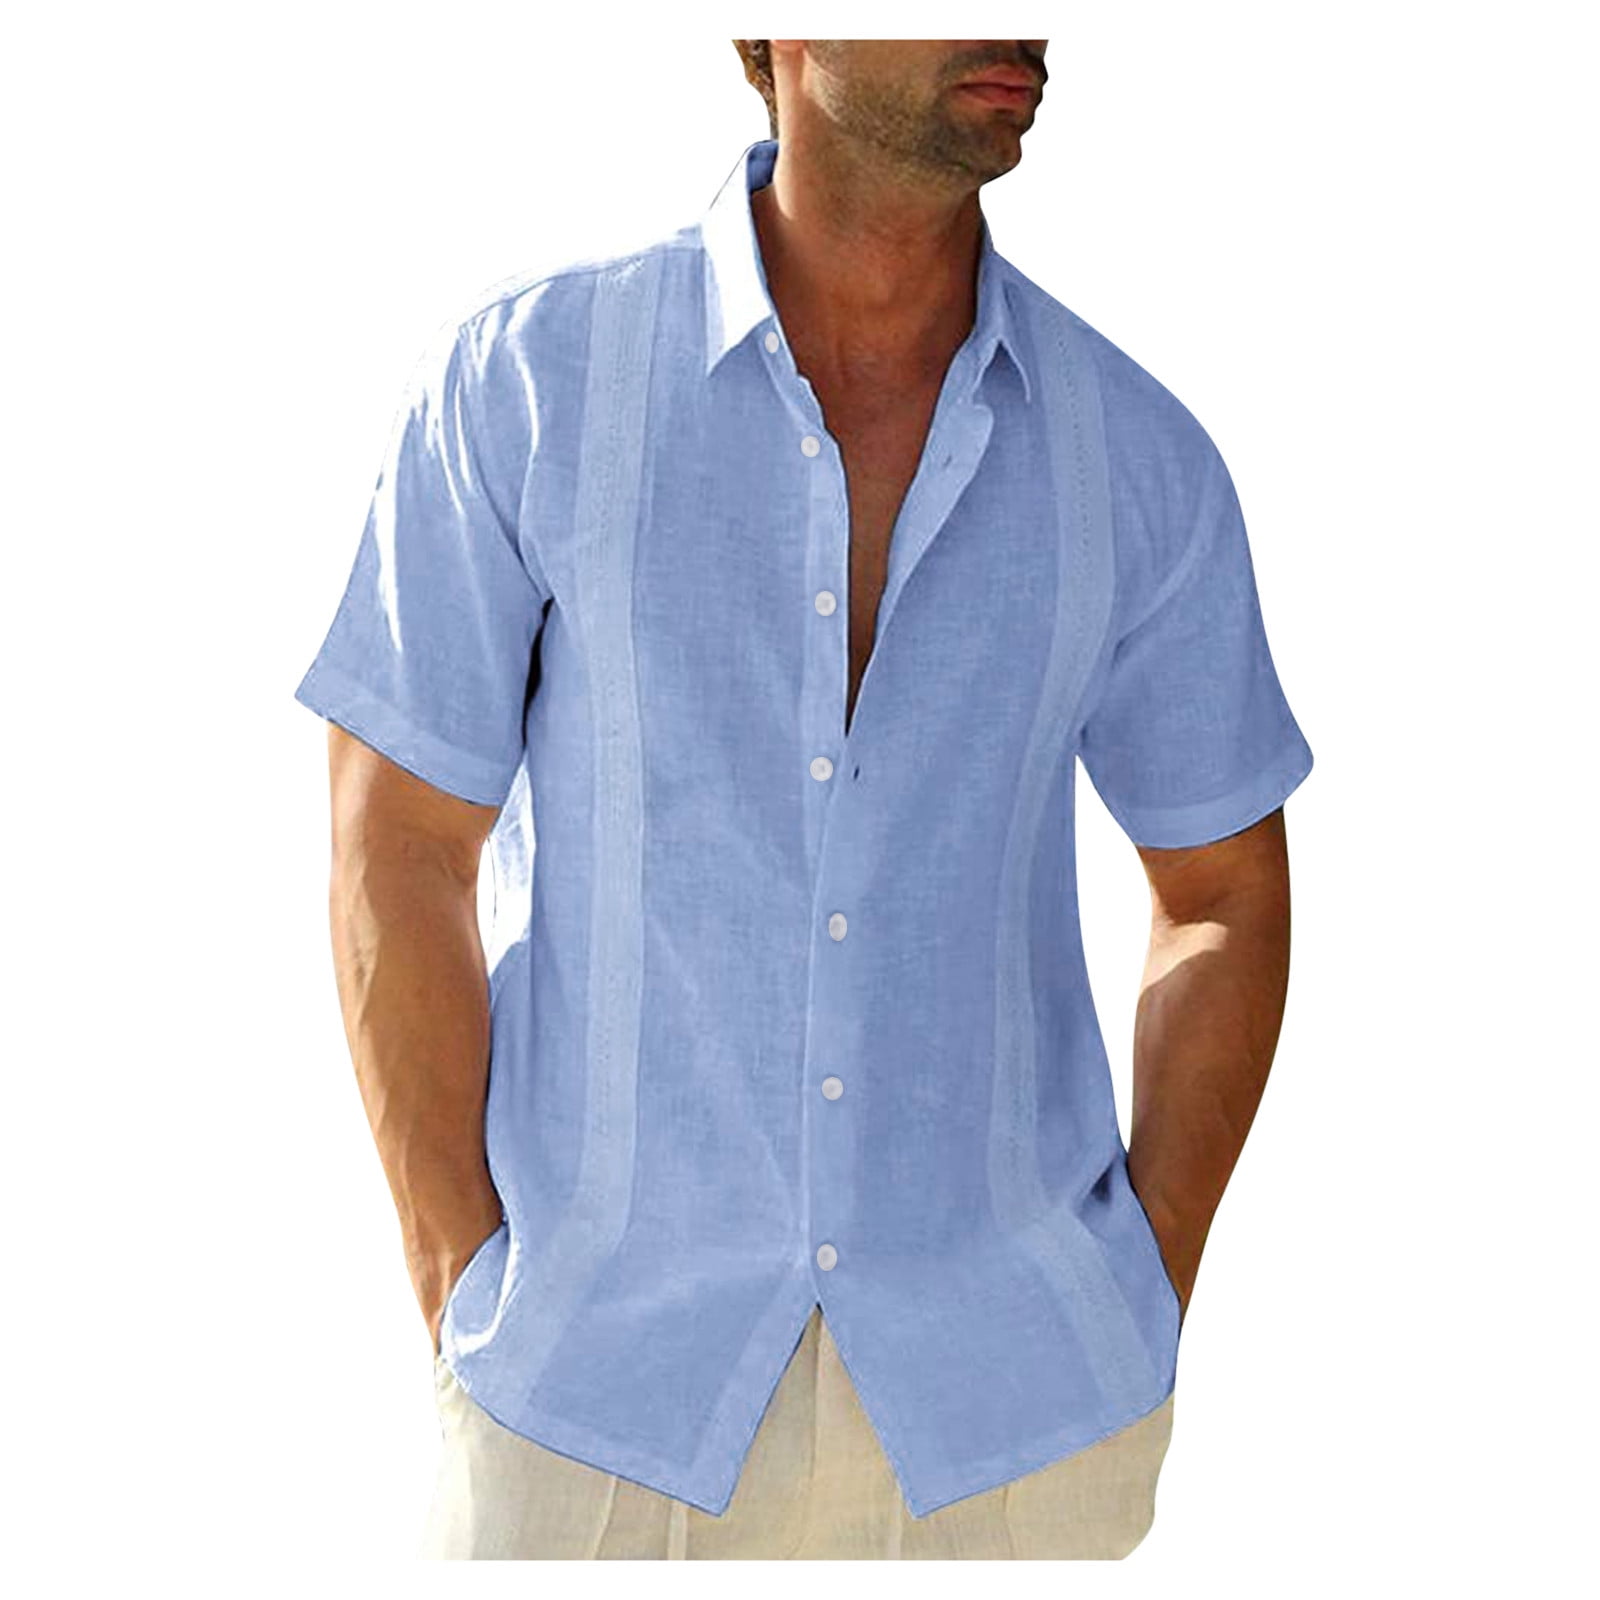 Men's Casual Embroidery Edge Solid Shirt Short Sleeve Turn-Down Collar ...